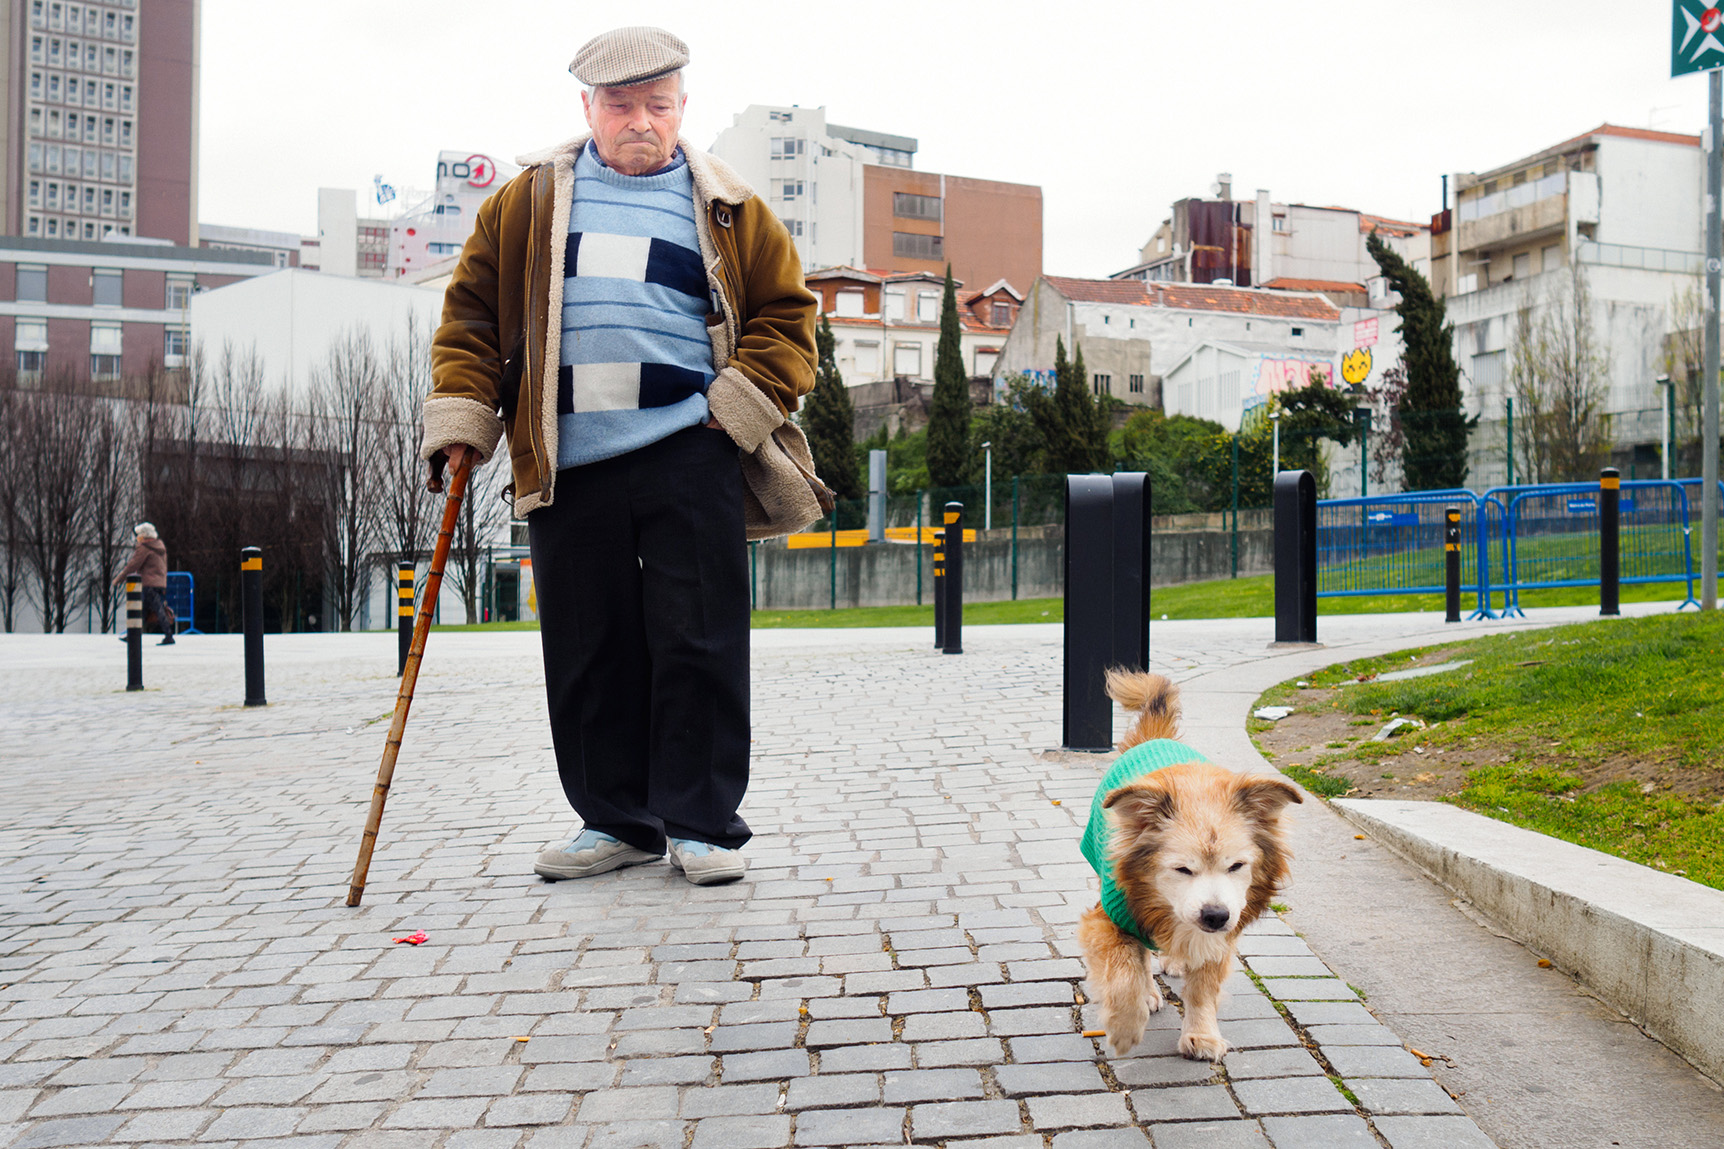 Old man walking with his old dog close to Trindade train station in Porto